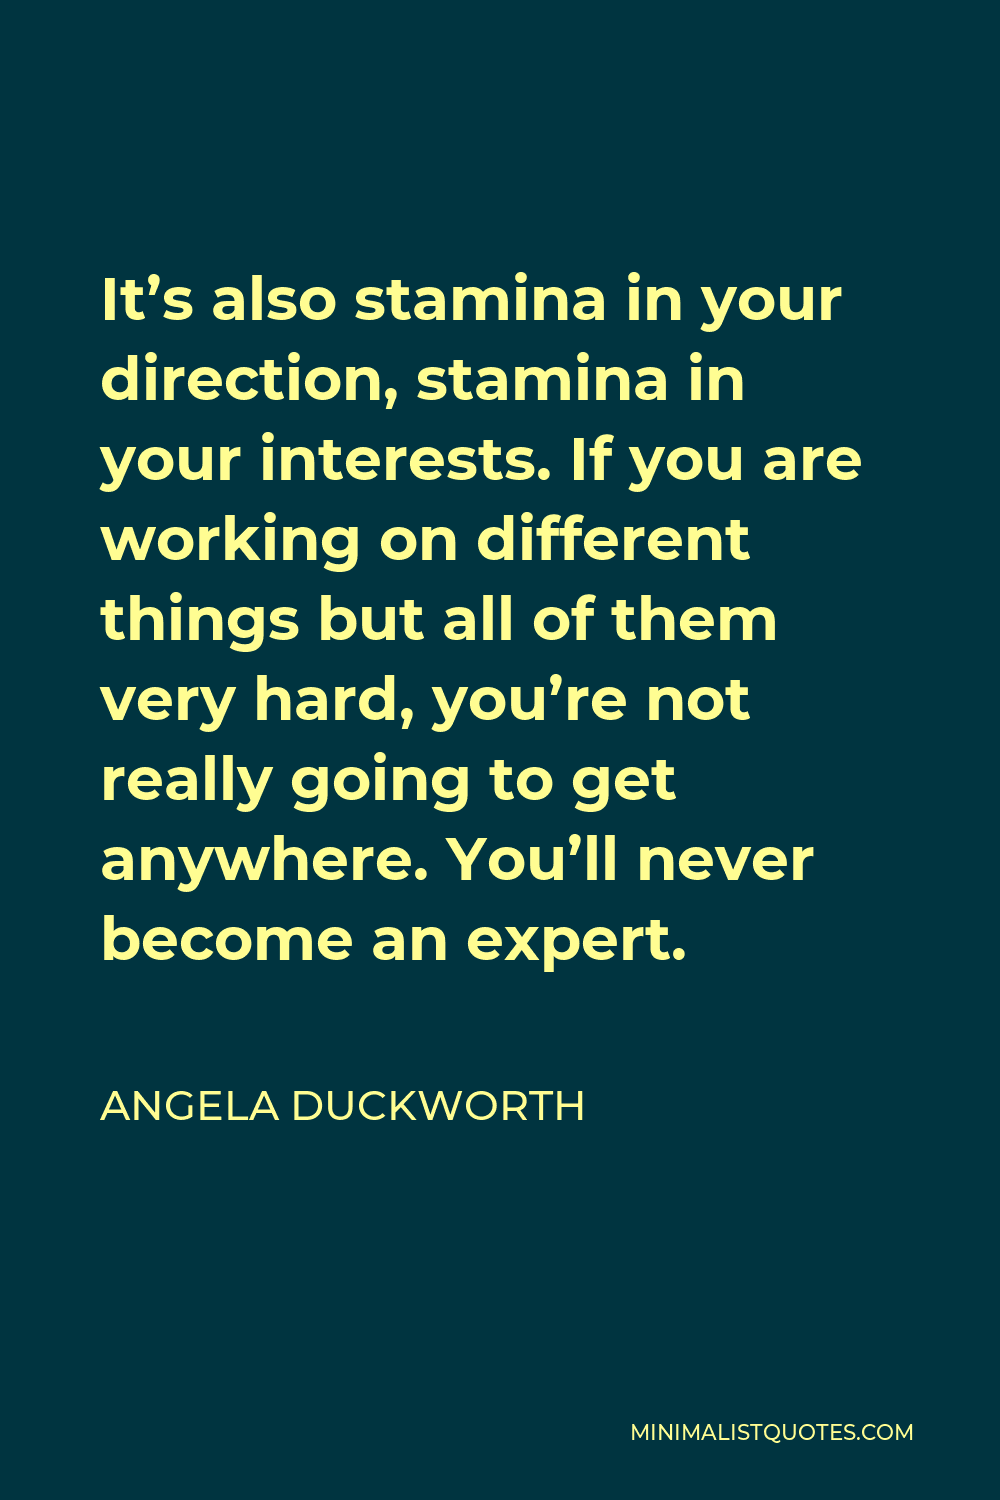 Angela Duckworth Quote - It’s also stamina in your direction, stamina in your interests. If you are working on different things but all of them very hard, you’re not really going to get anywhere. You’ll never become an expert.